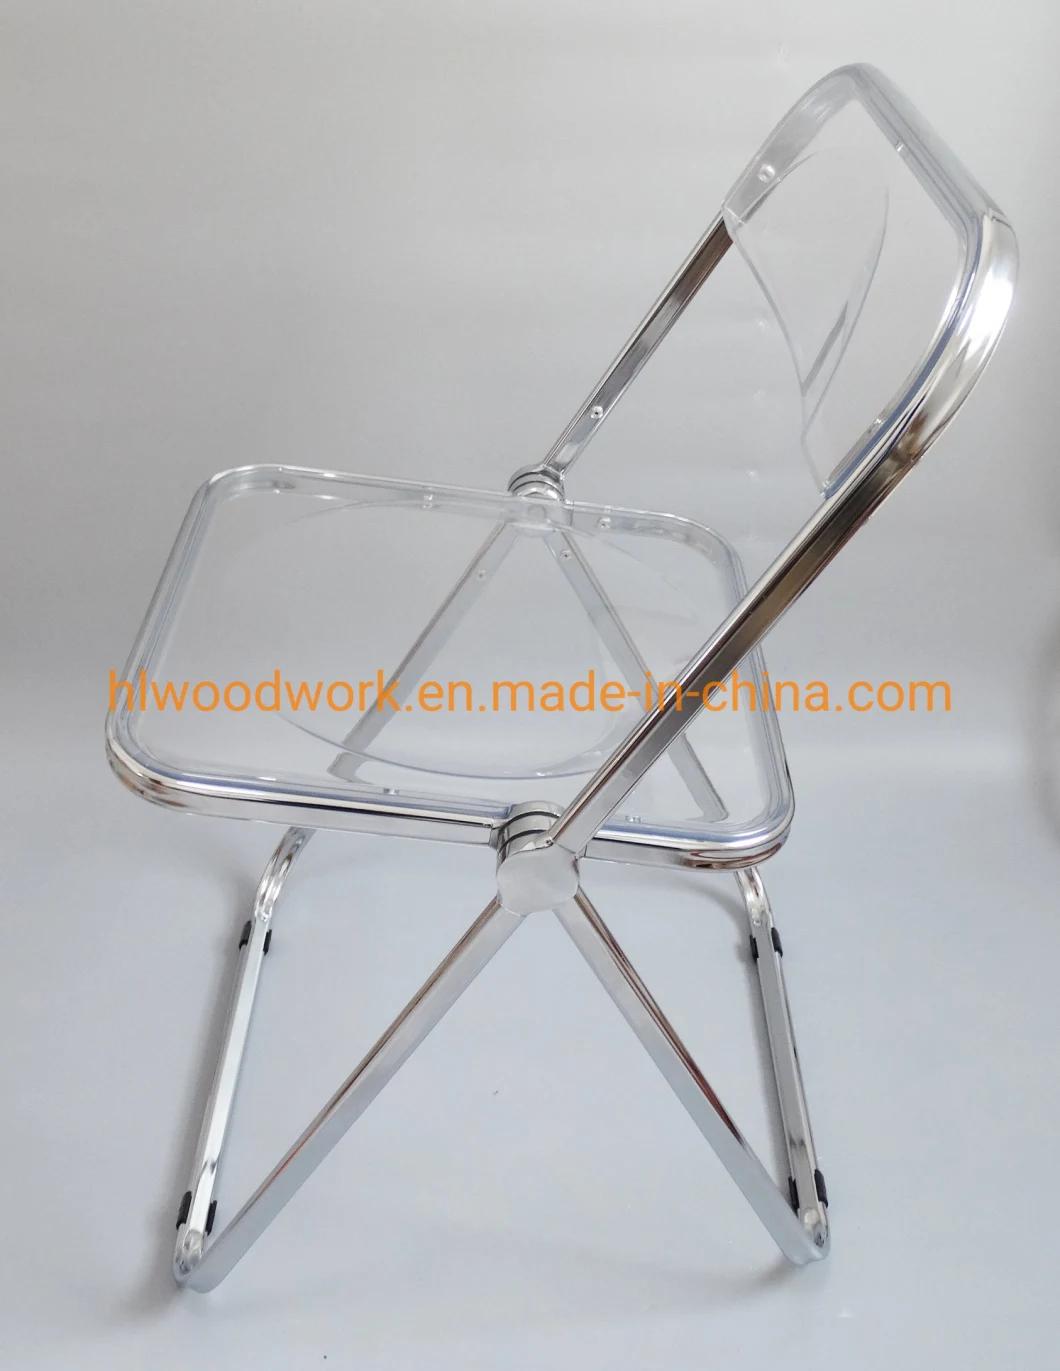 Modern Transparent Grey Folding Chair PC Plastic Study Room Chair Chrome Frame Office Bar Dining Leisure Banquet Wedding Meeting Chair Plastic Dining Chair